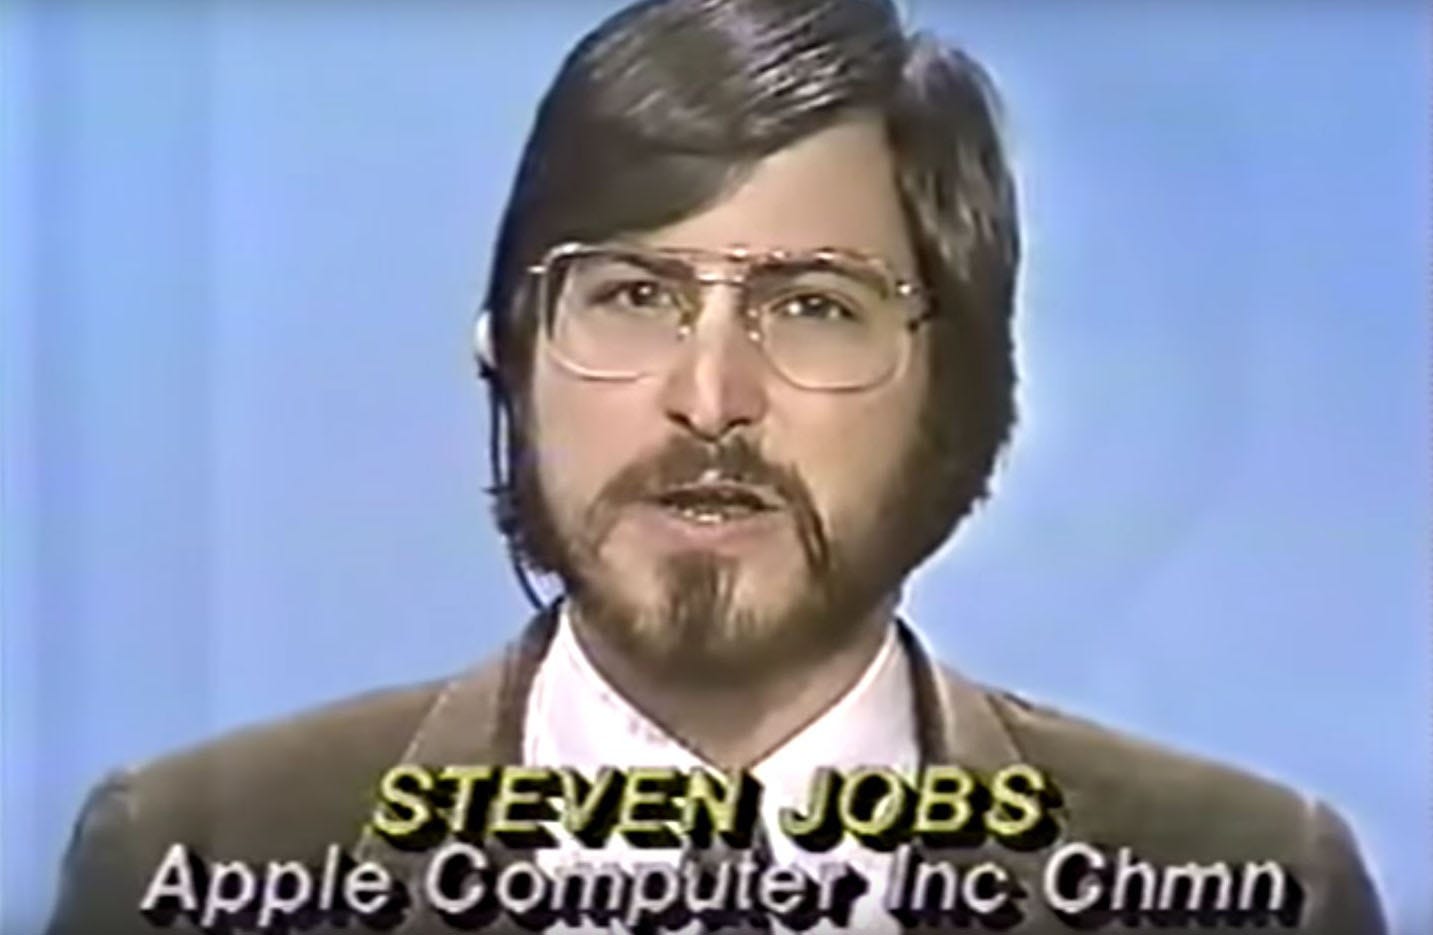 FOX NEWS: In 1981, Apple's Steve Jobs said computers would free us from drudgery